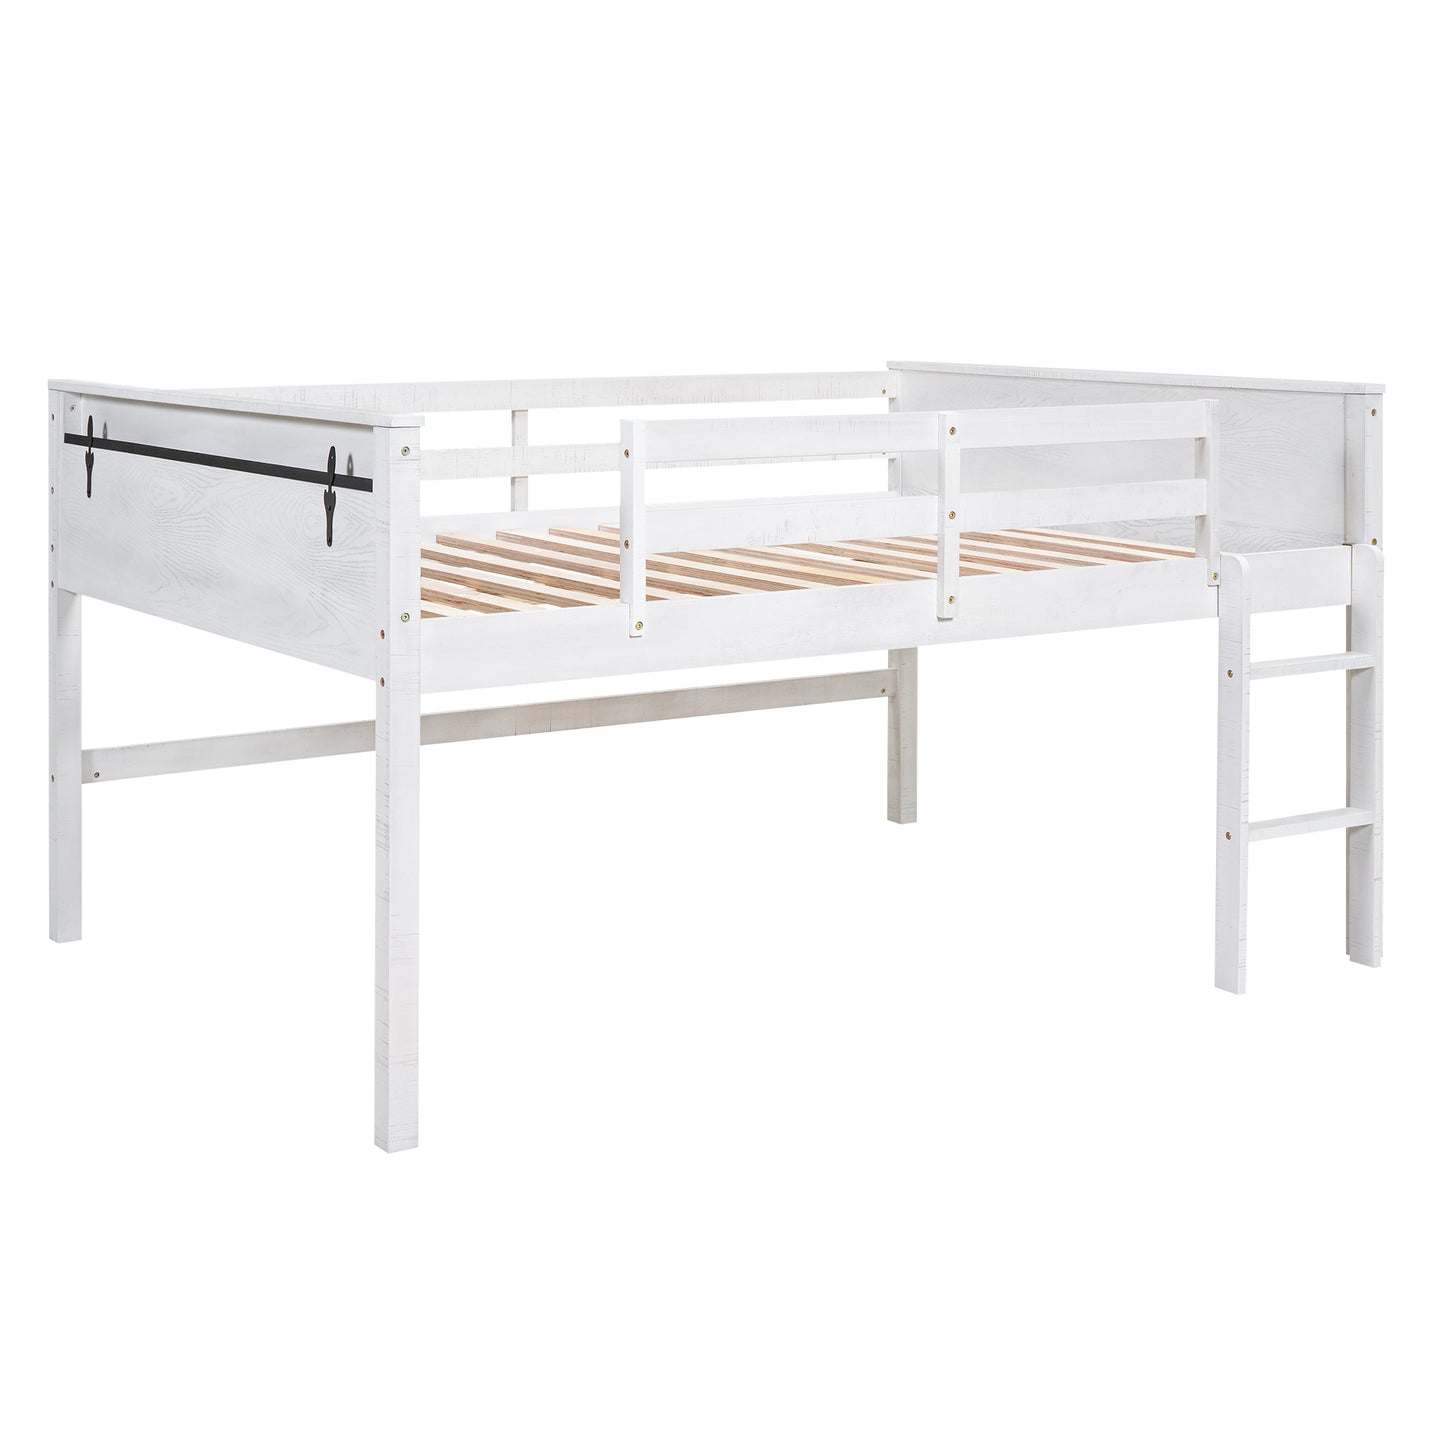 Wood Full Size Loft Bed with Hanging Clothes Racks, White